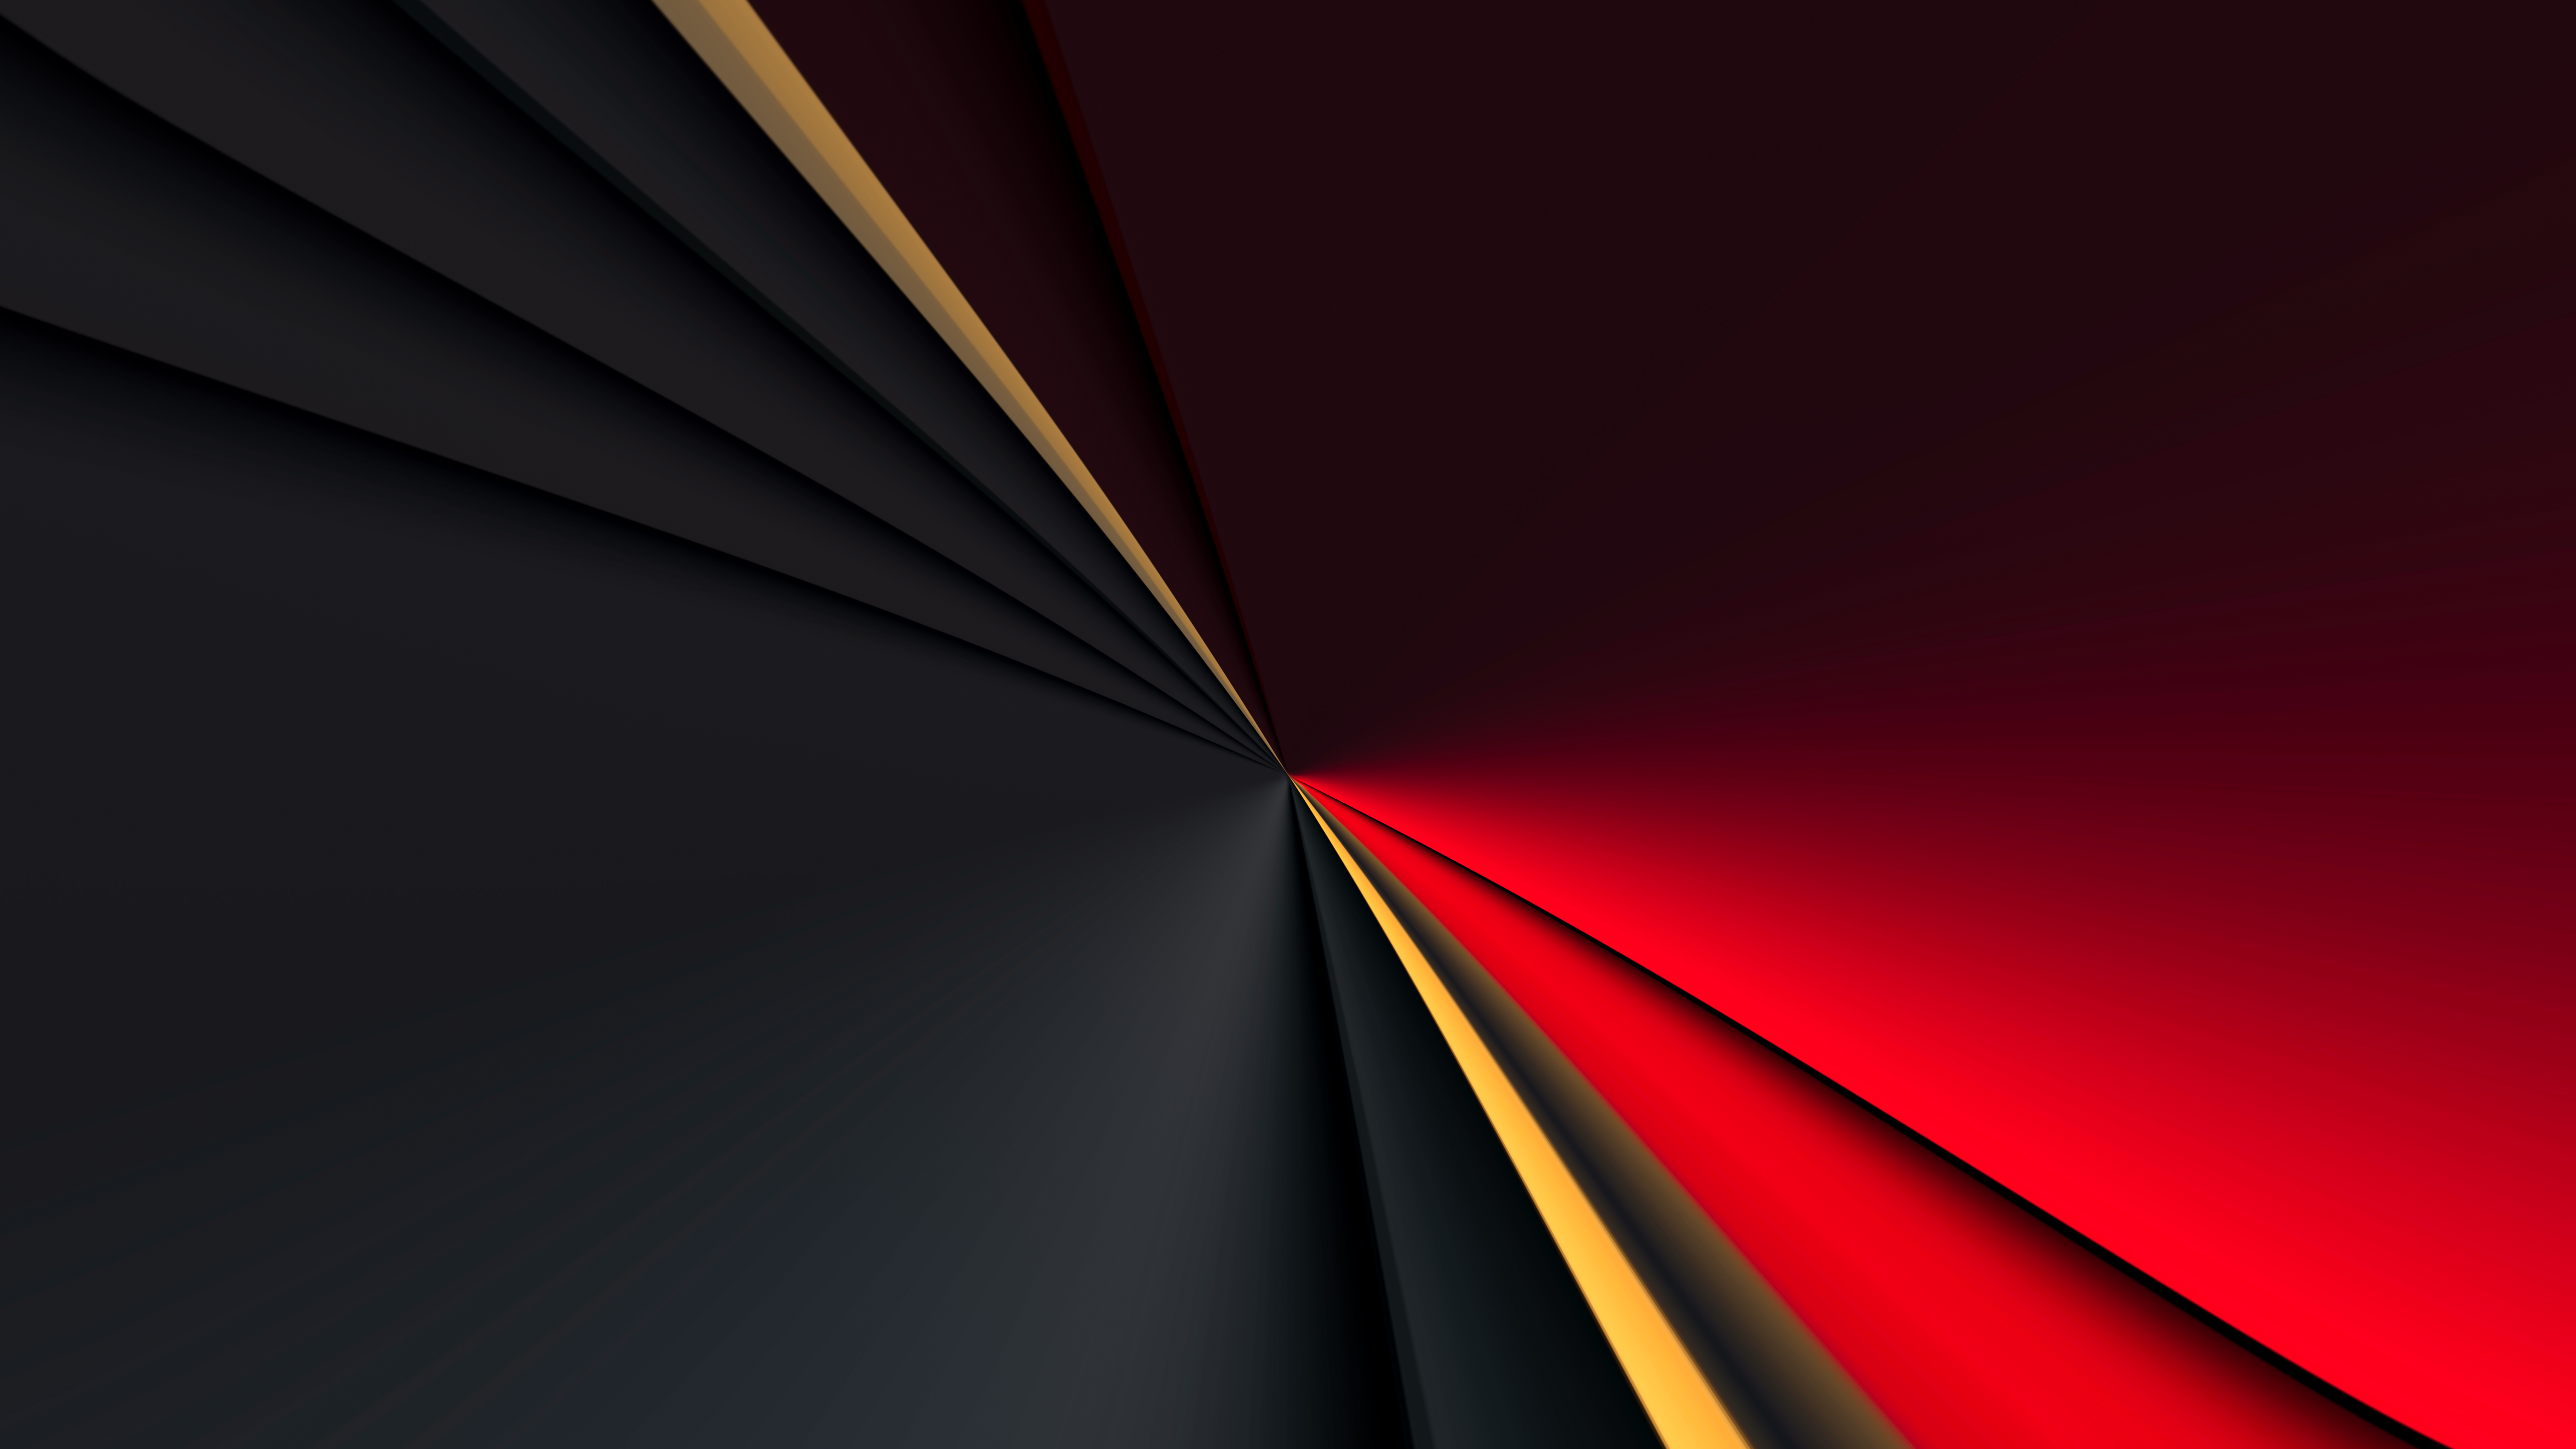 black, symmetry, abstract, red High Definition image